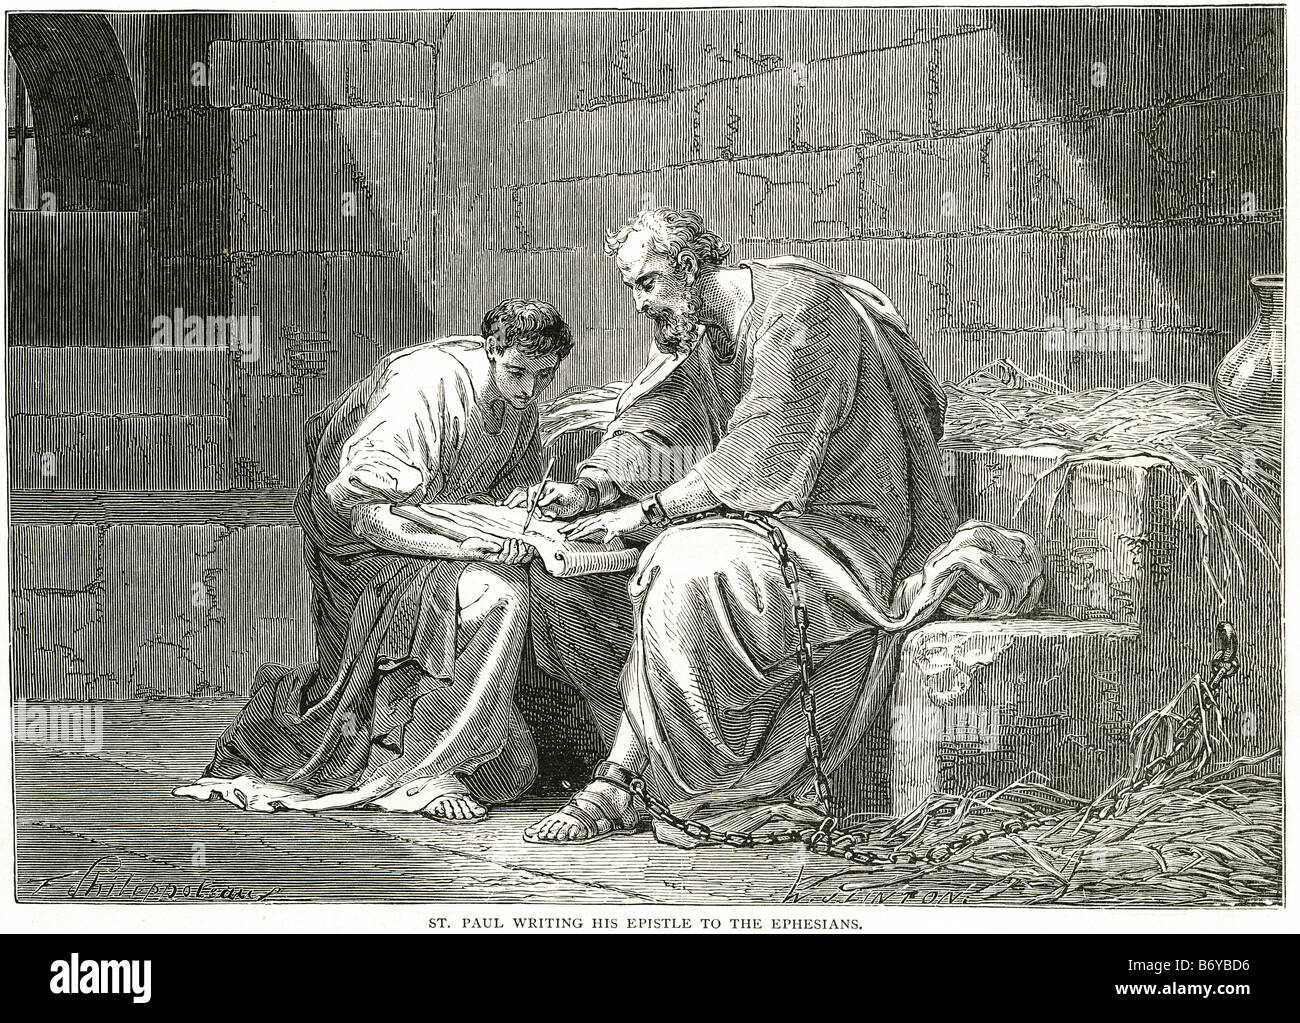 st. paul writing his epistle to the ephesians Described by William Barclay as the 'Queen of the Epistles', the Epistle to the Ep Stock Photo